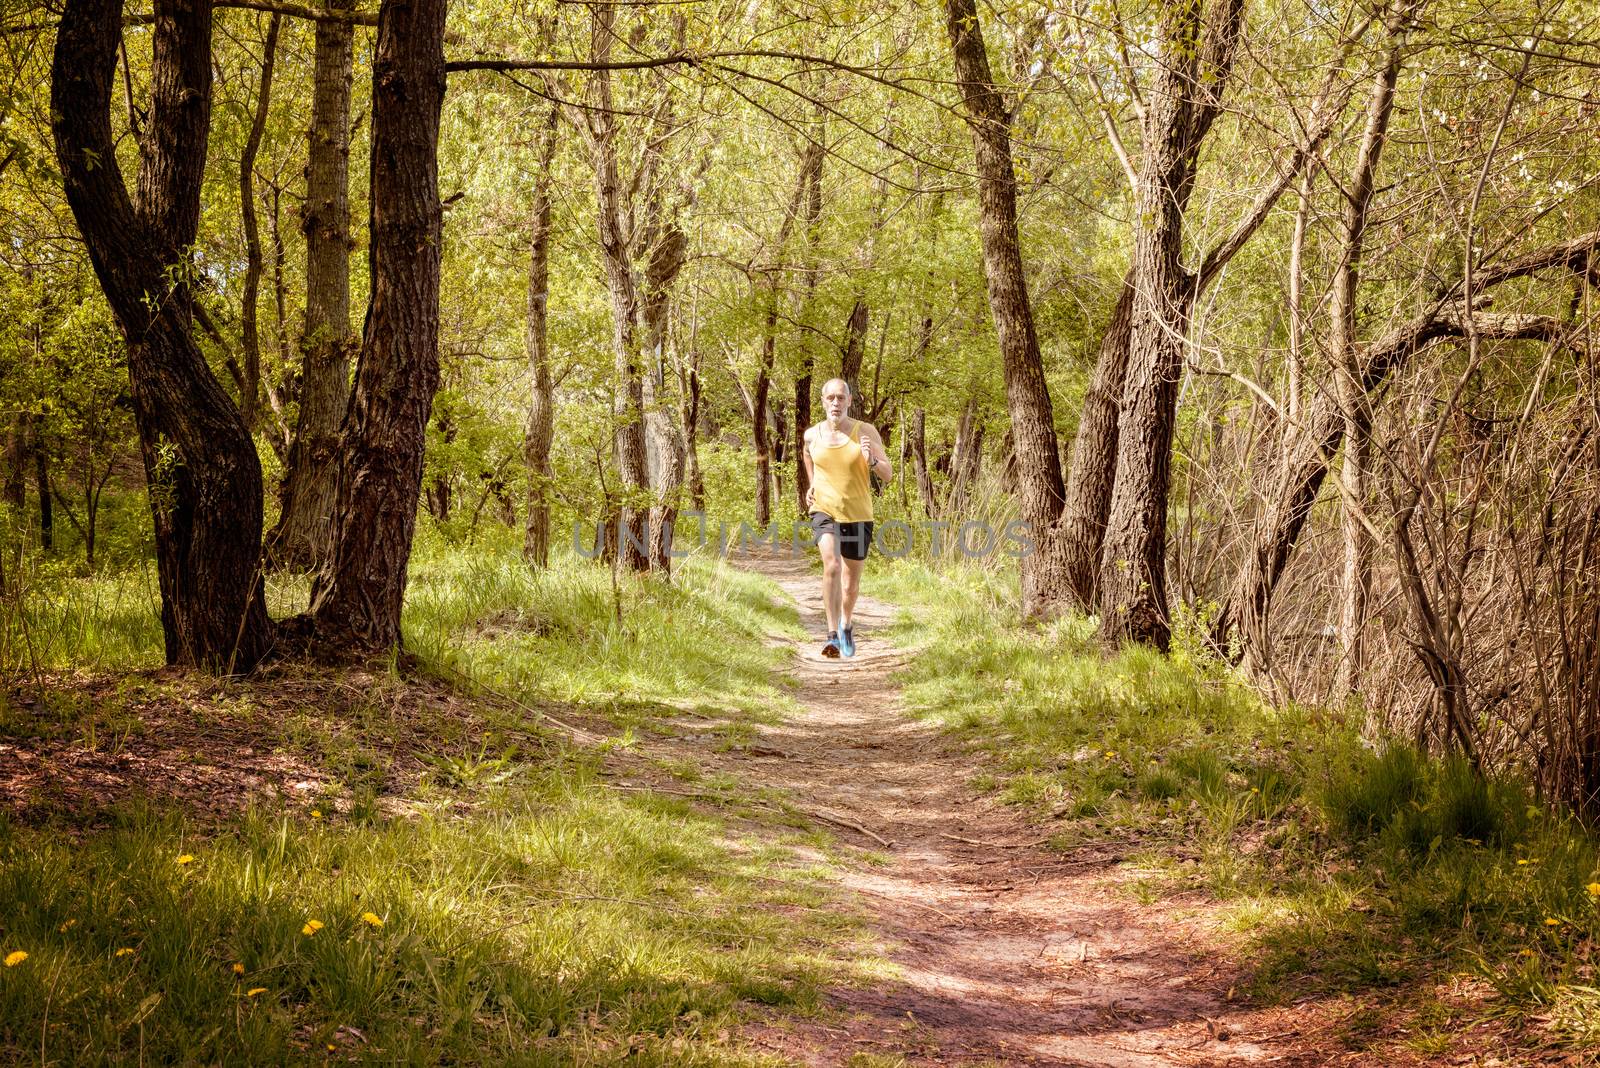 A senior man worn in black and yellow is running in the forest, during a warm spring day evening